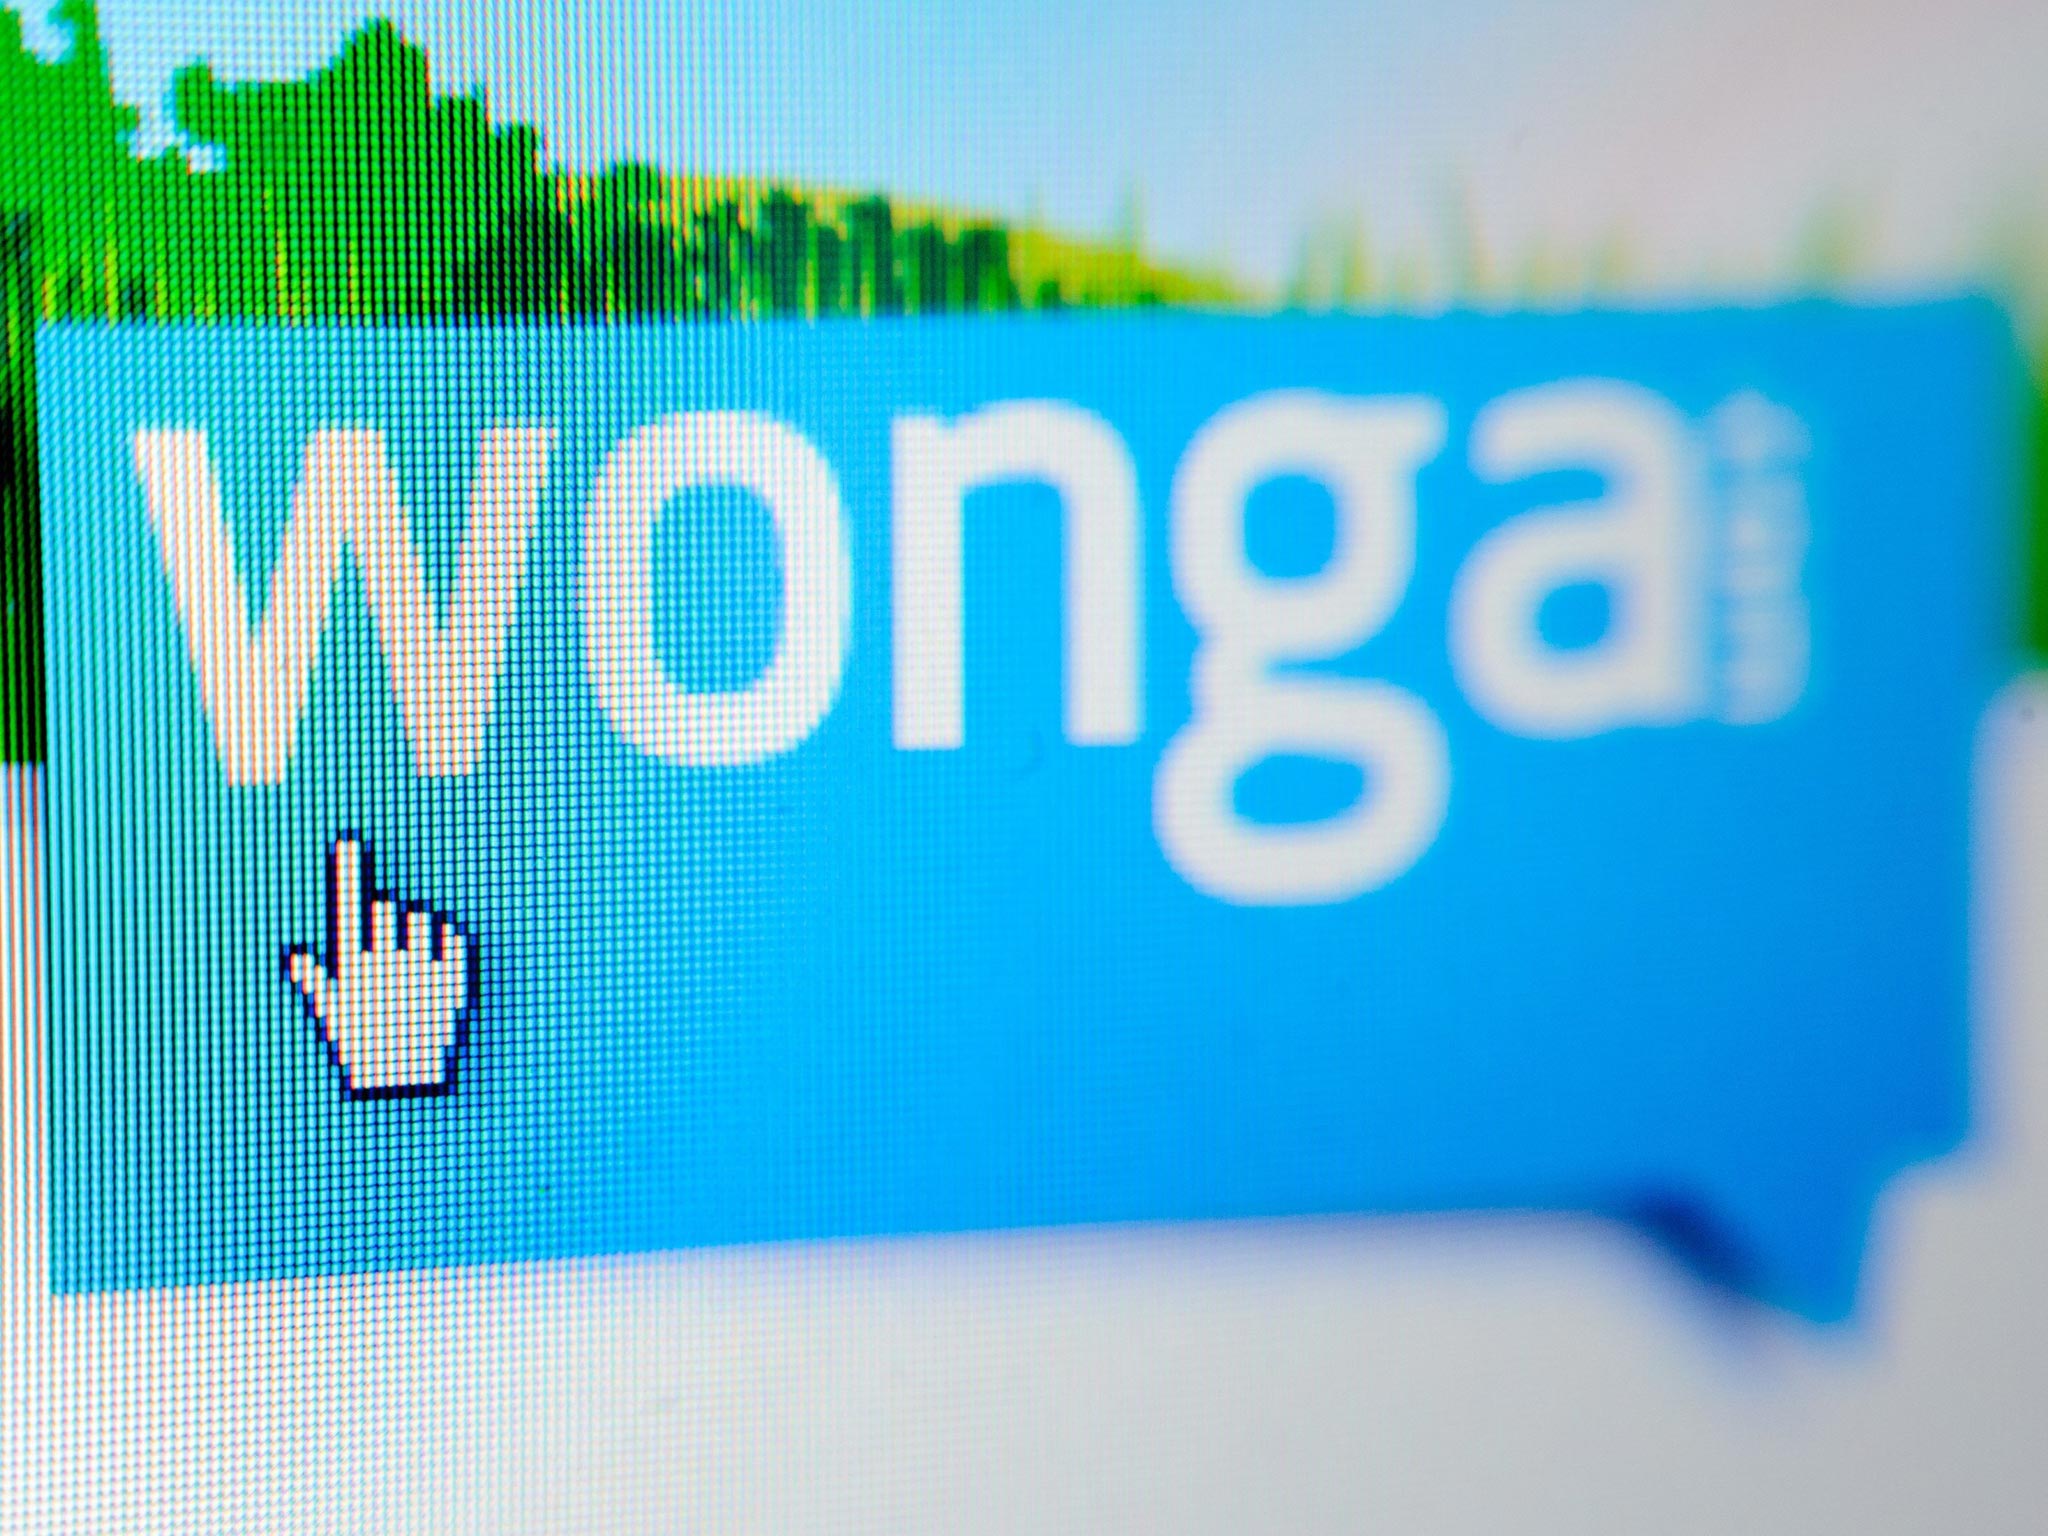 Wonga, the UK’ s biggest payday lender, saw its losses double to £80.2 million last year